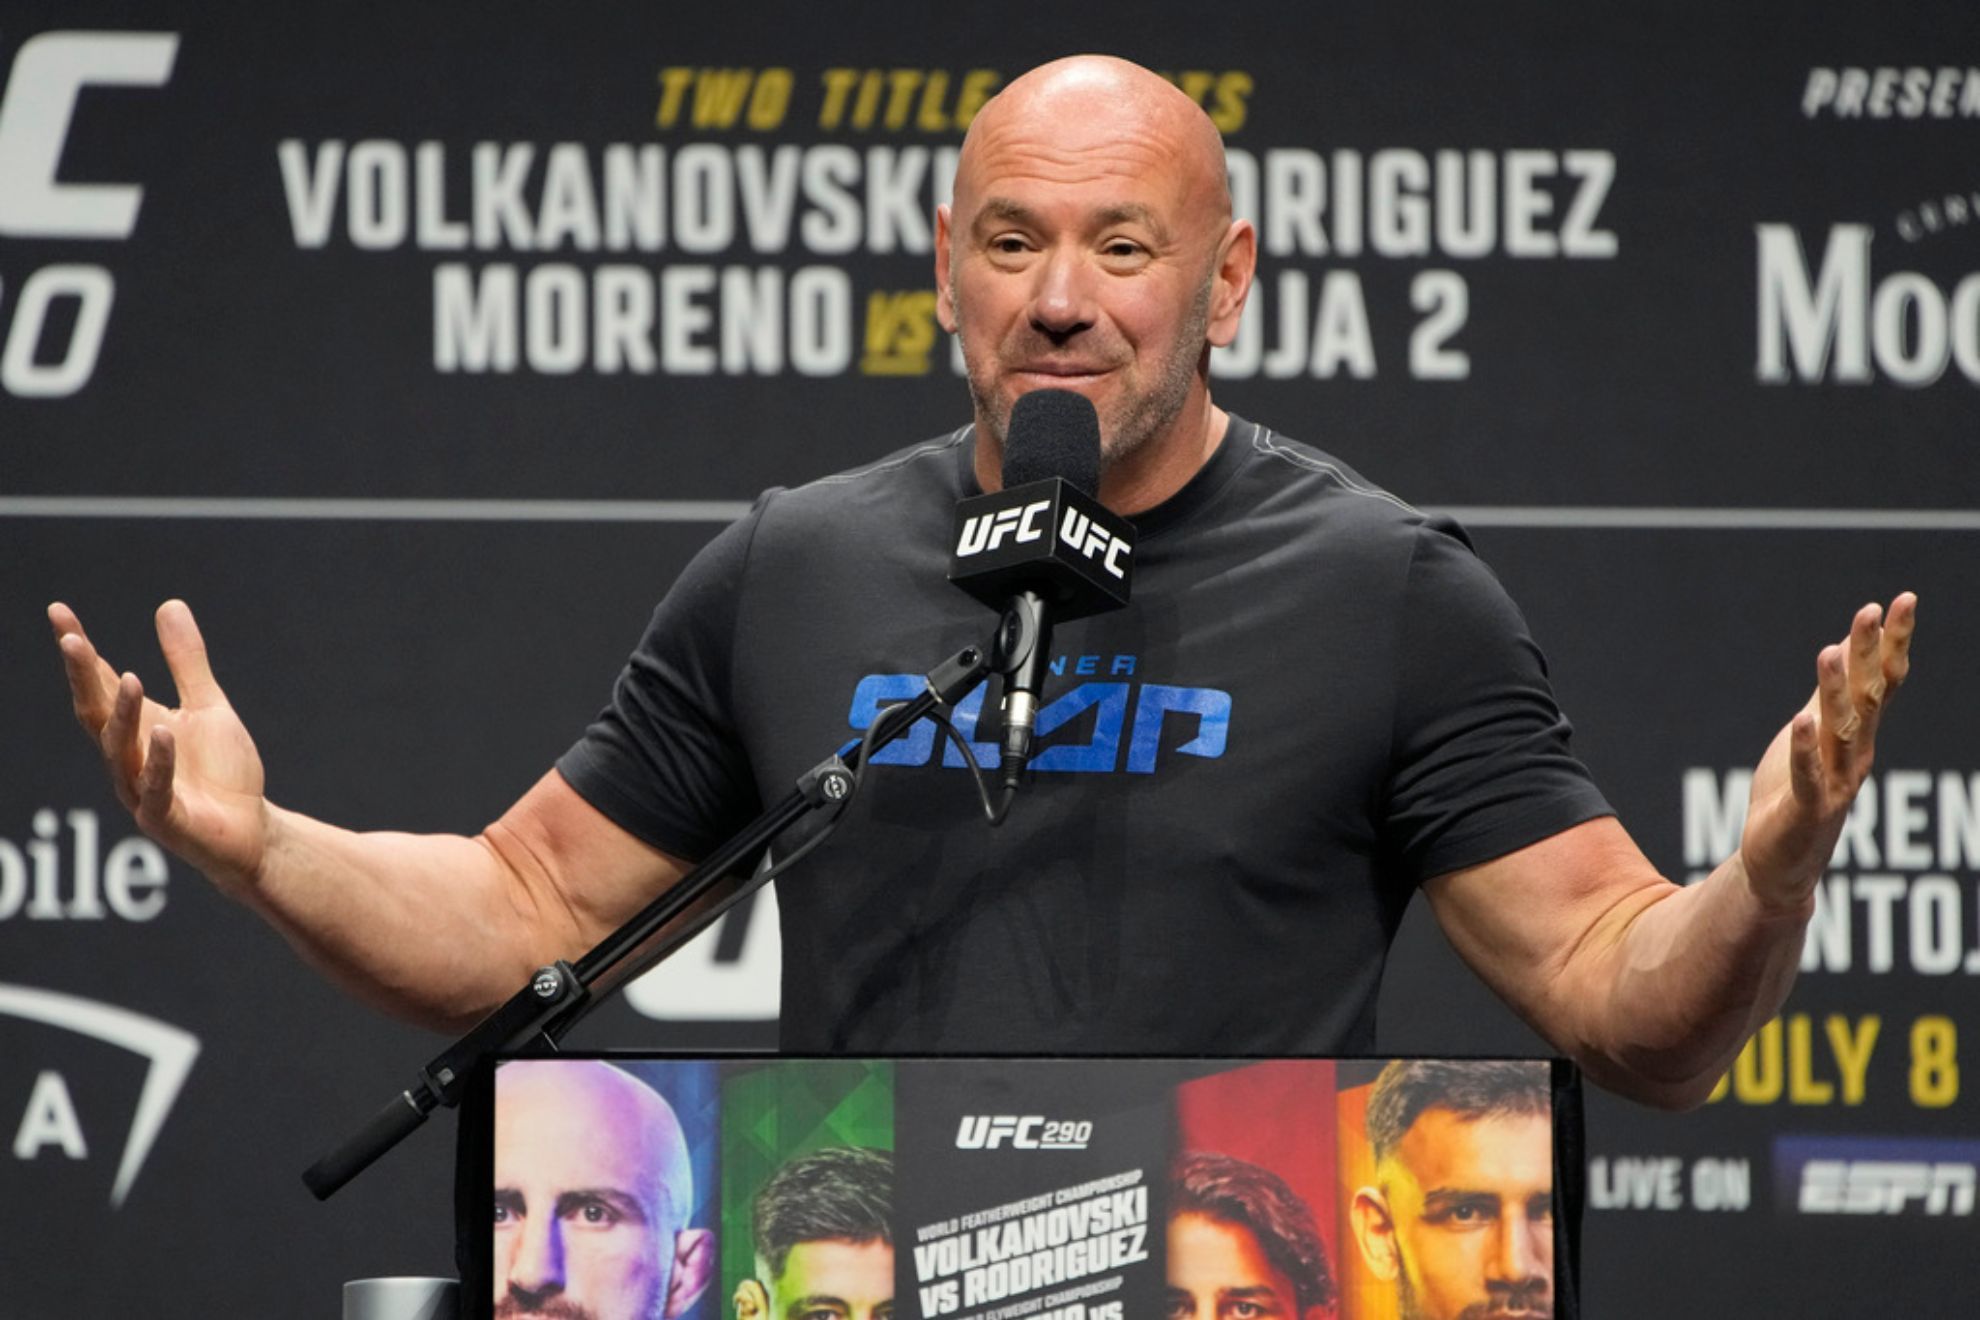 Dana White is coming off the biggest UFC event in history